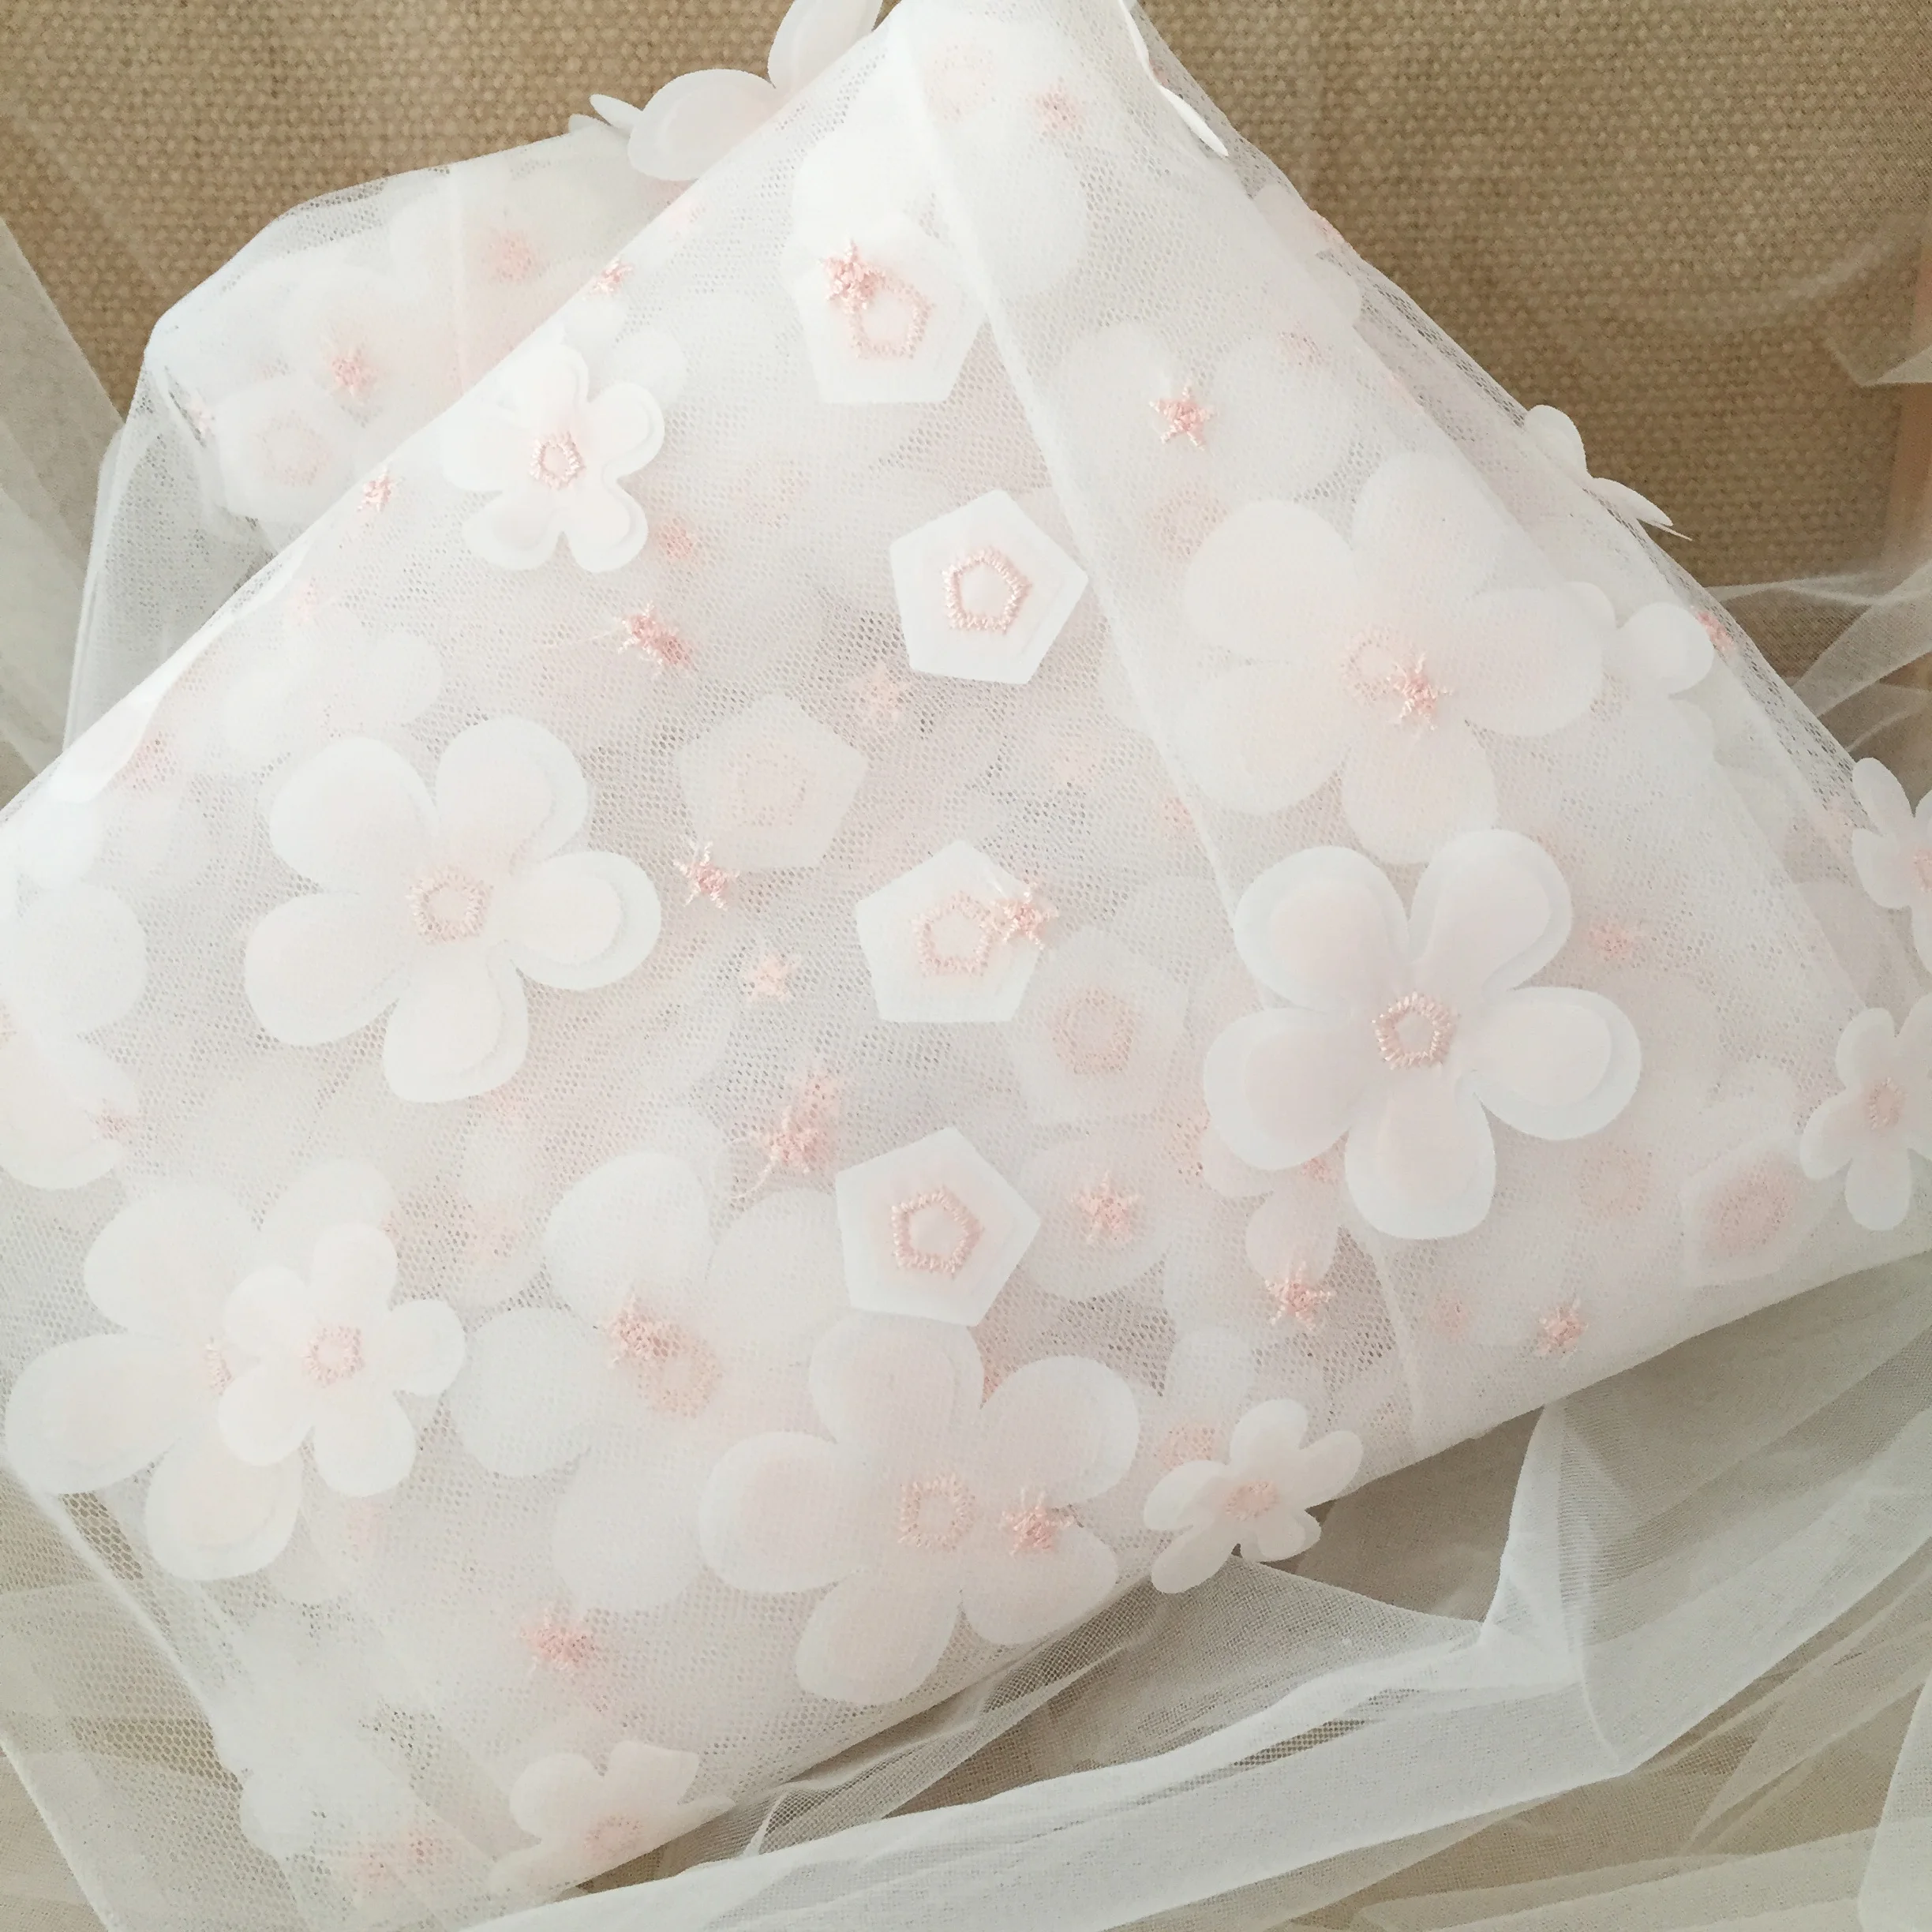 

2 Yards 3D Full Daisy Blossom Flower Tulle Lace Fabric in Pink White , Soft Tulle Wedding Gown Bridal Dress Prom Dress Fabric